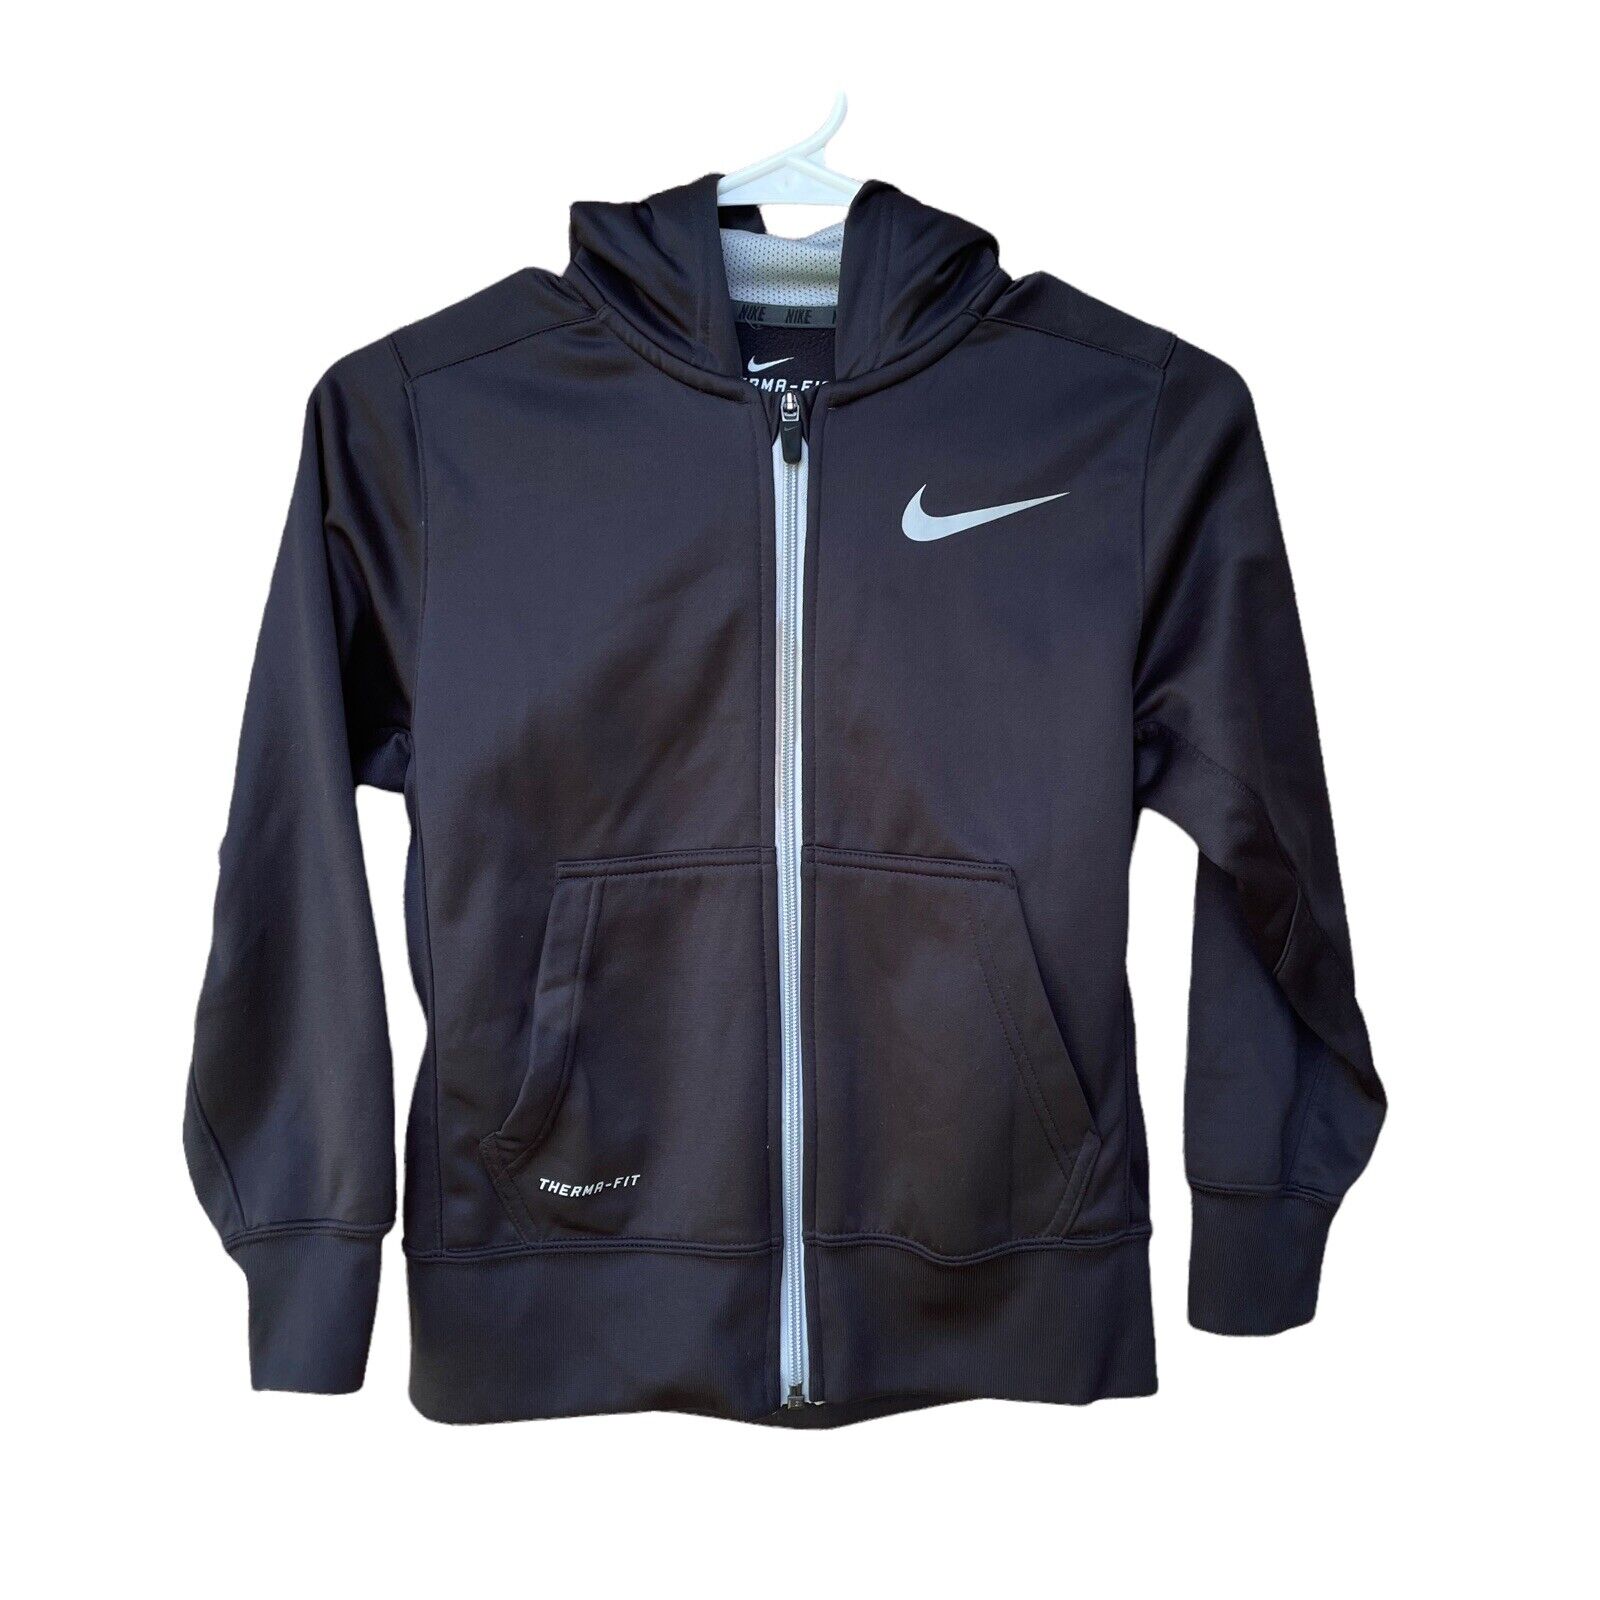 Nike Unisex Kids Black Therma-fit Full Zip Up Hooded Track Jacket Size Small